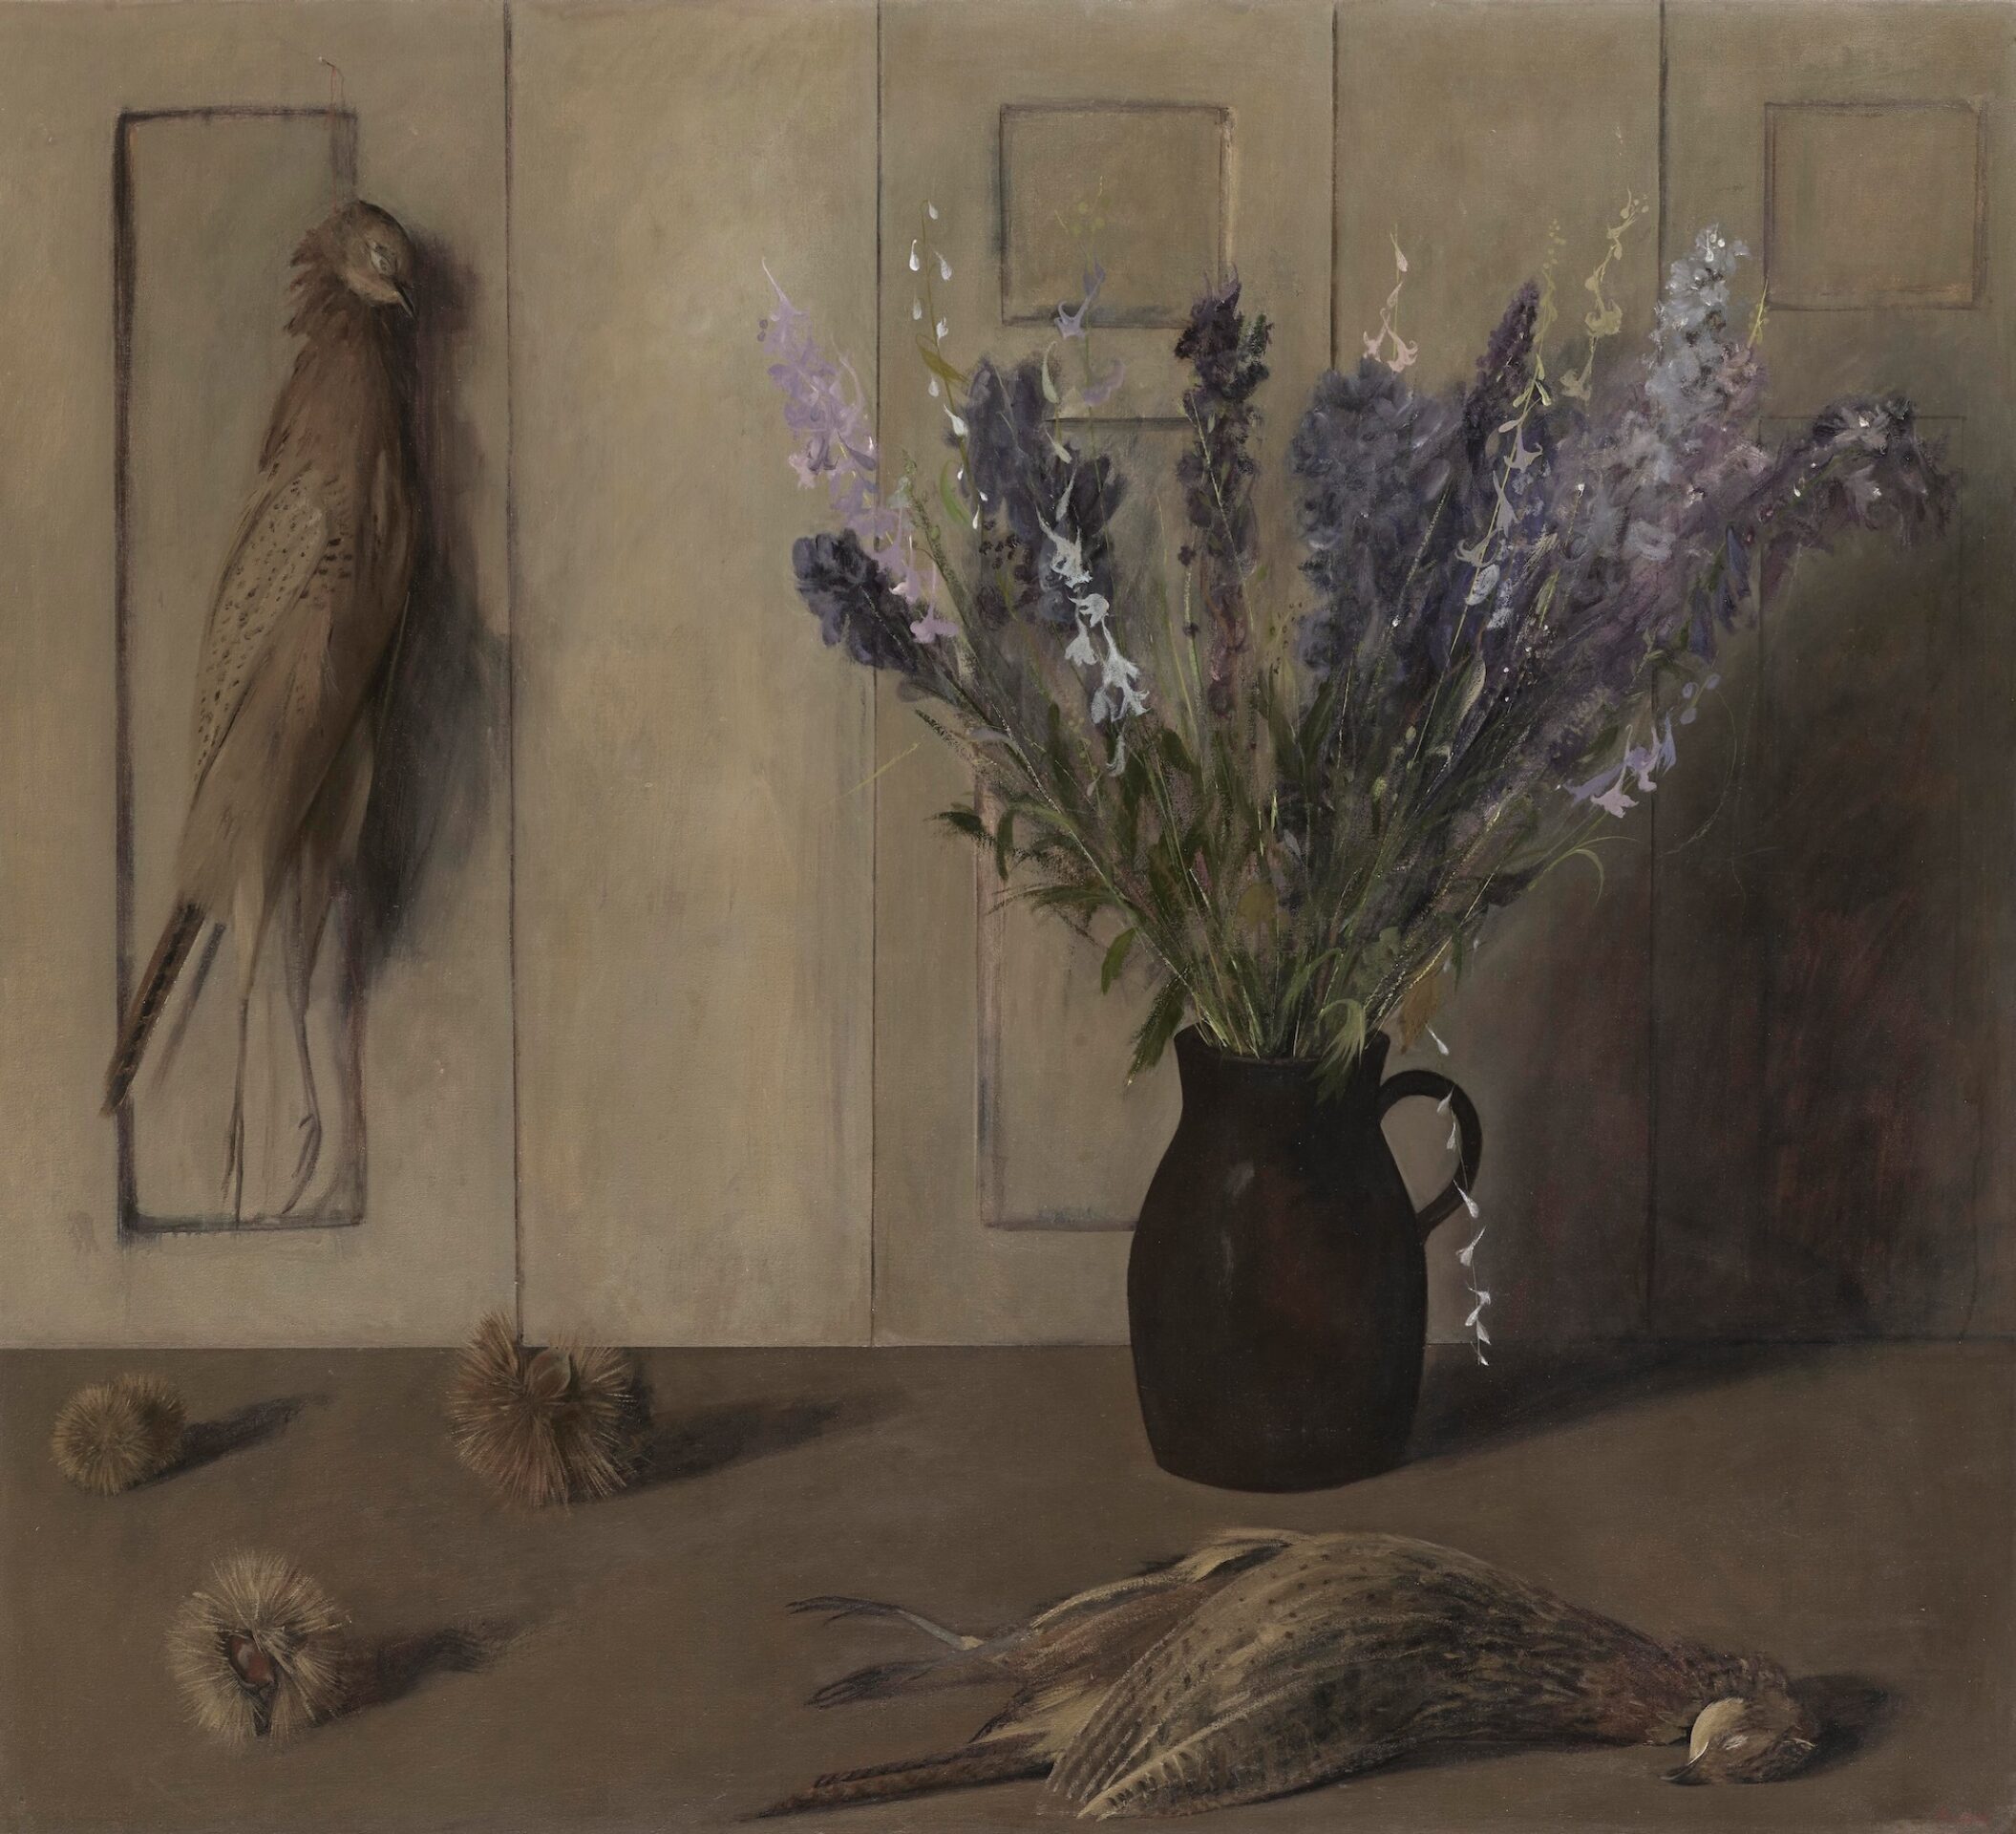 Two Pheasants and delphiniums    59 x 45   2009